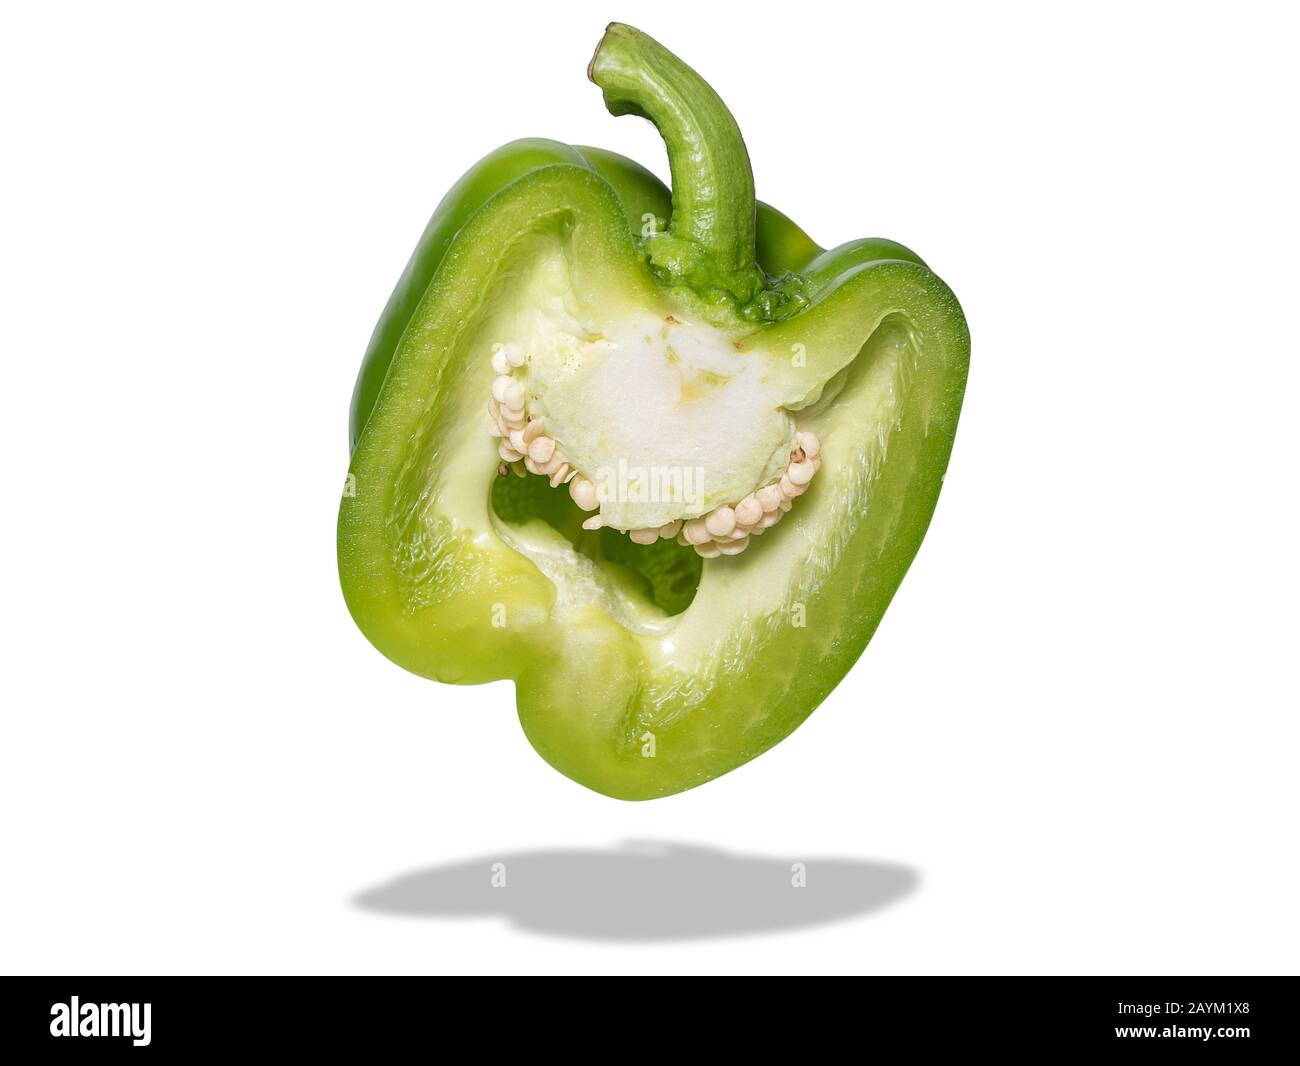 a part of fresh green bell pepper slide isolated on white background with shadow Stock Photo